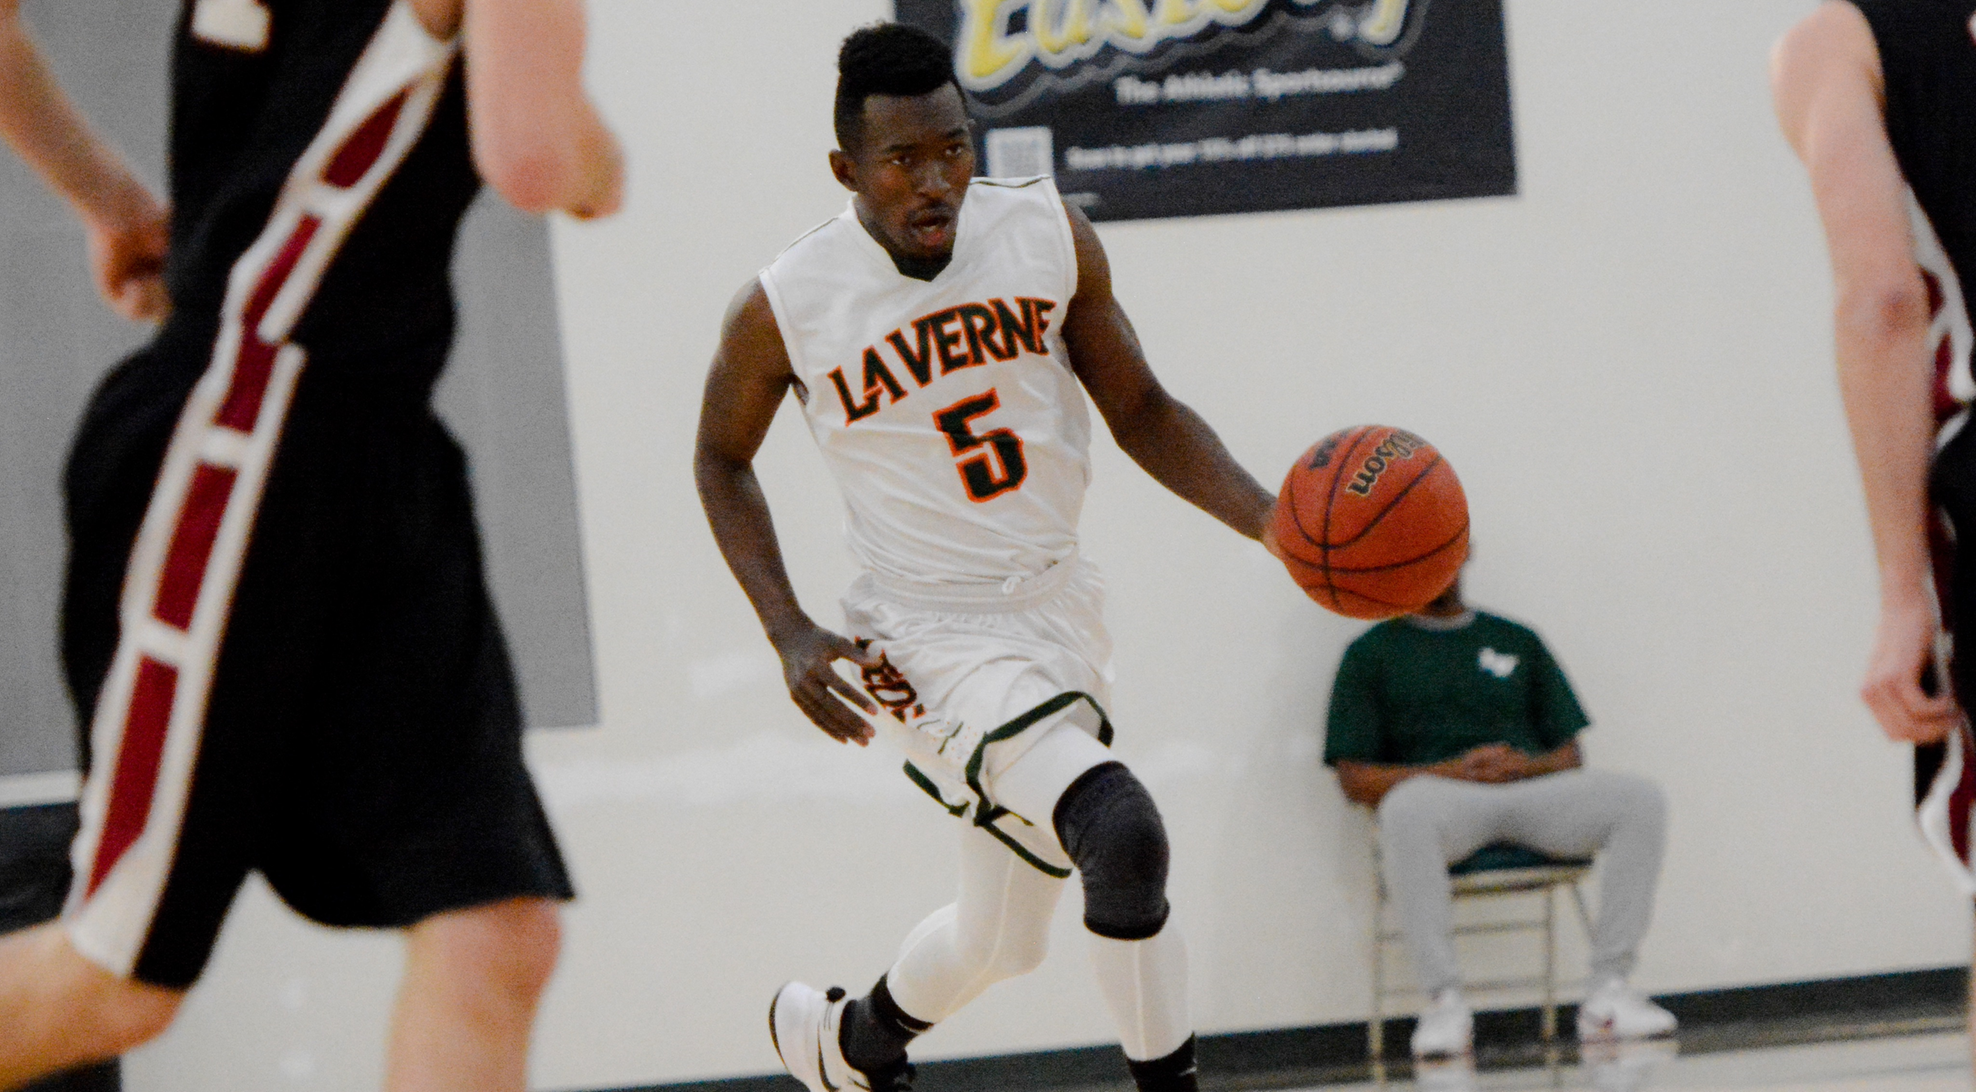 Late turnovers cost La Verne in 80-73 loss to Carthage